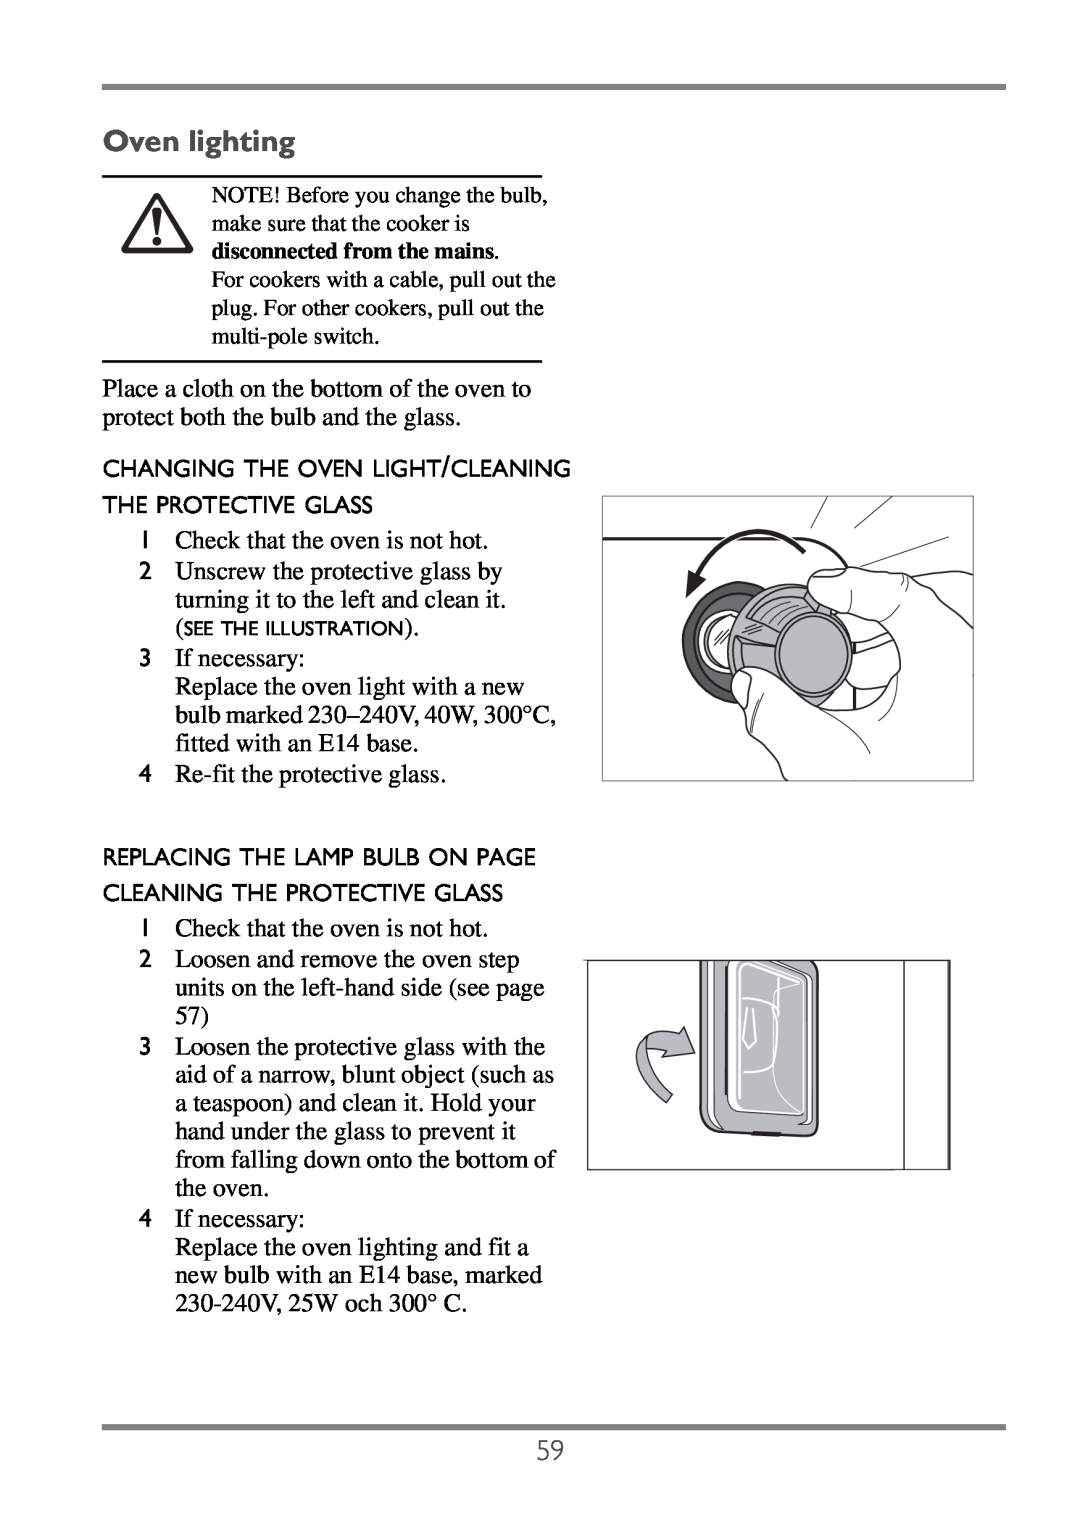 Electrolux EKC60752 user manual Oven lighting, Changing The Oven Light/Cleaning The Protective Glass 